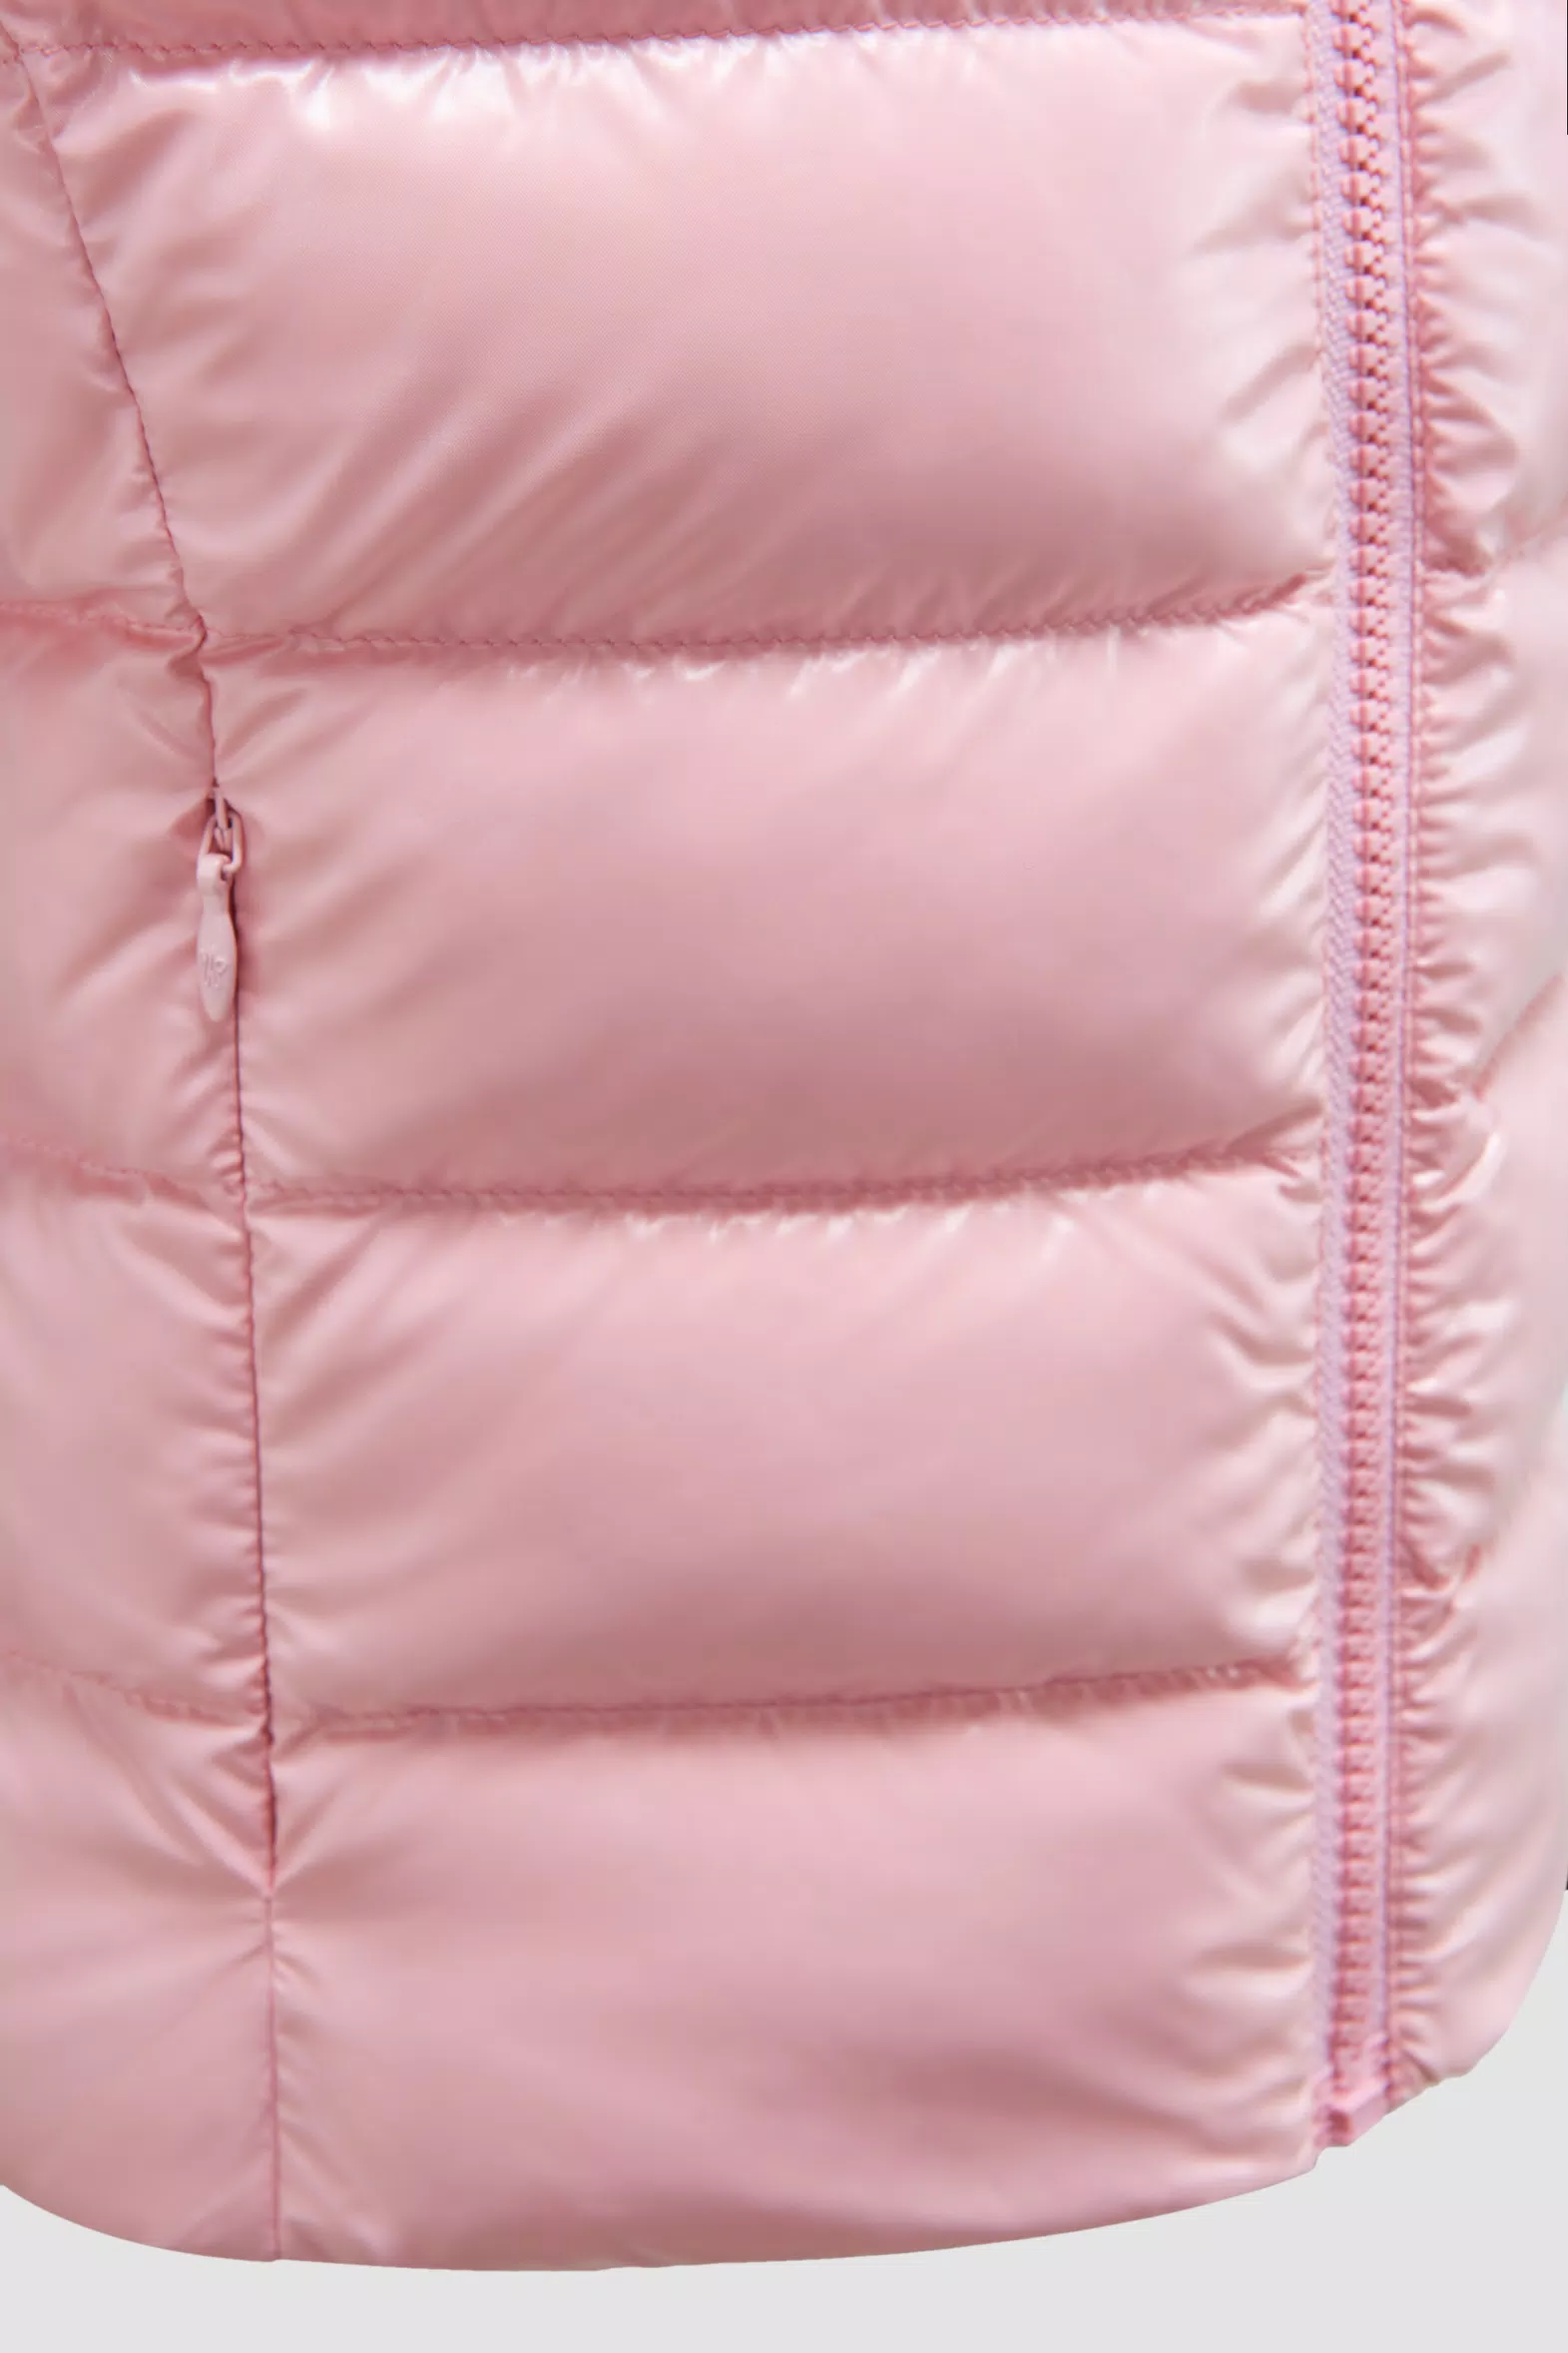 Pink Ghany Down Gilet - Down Jackets & Vests for Children | Moncler GB